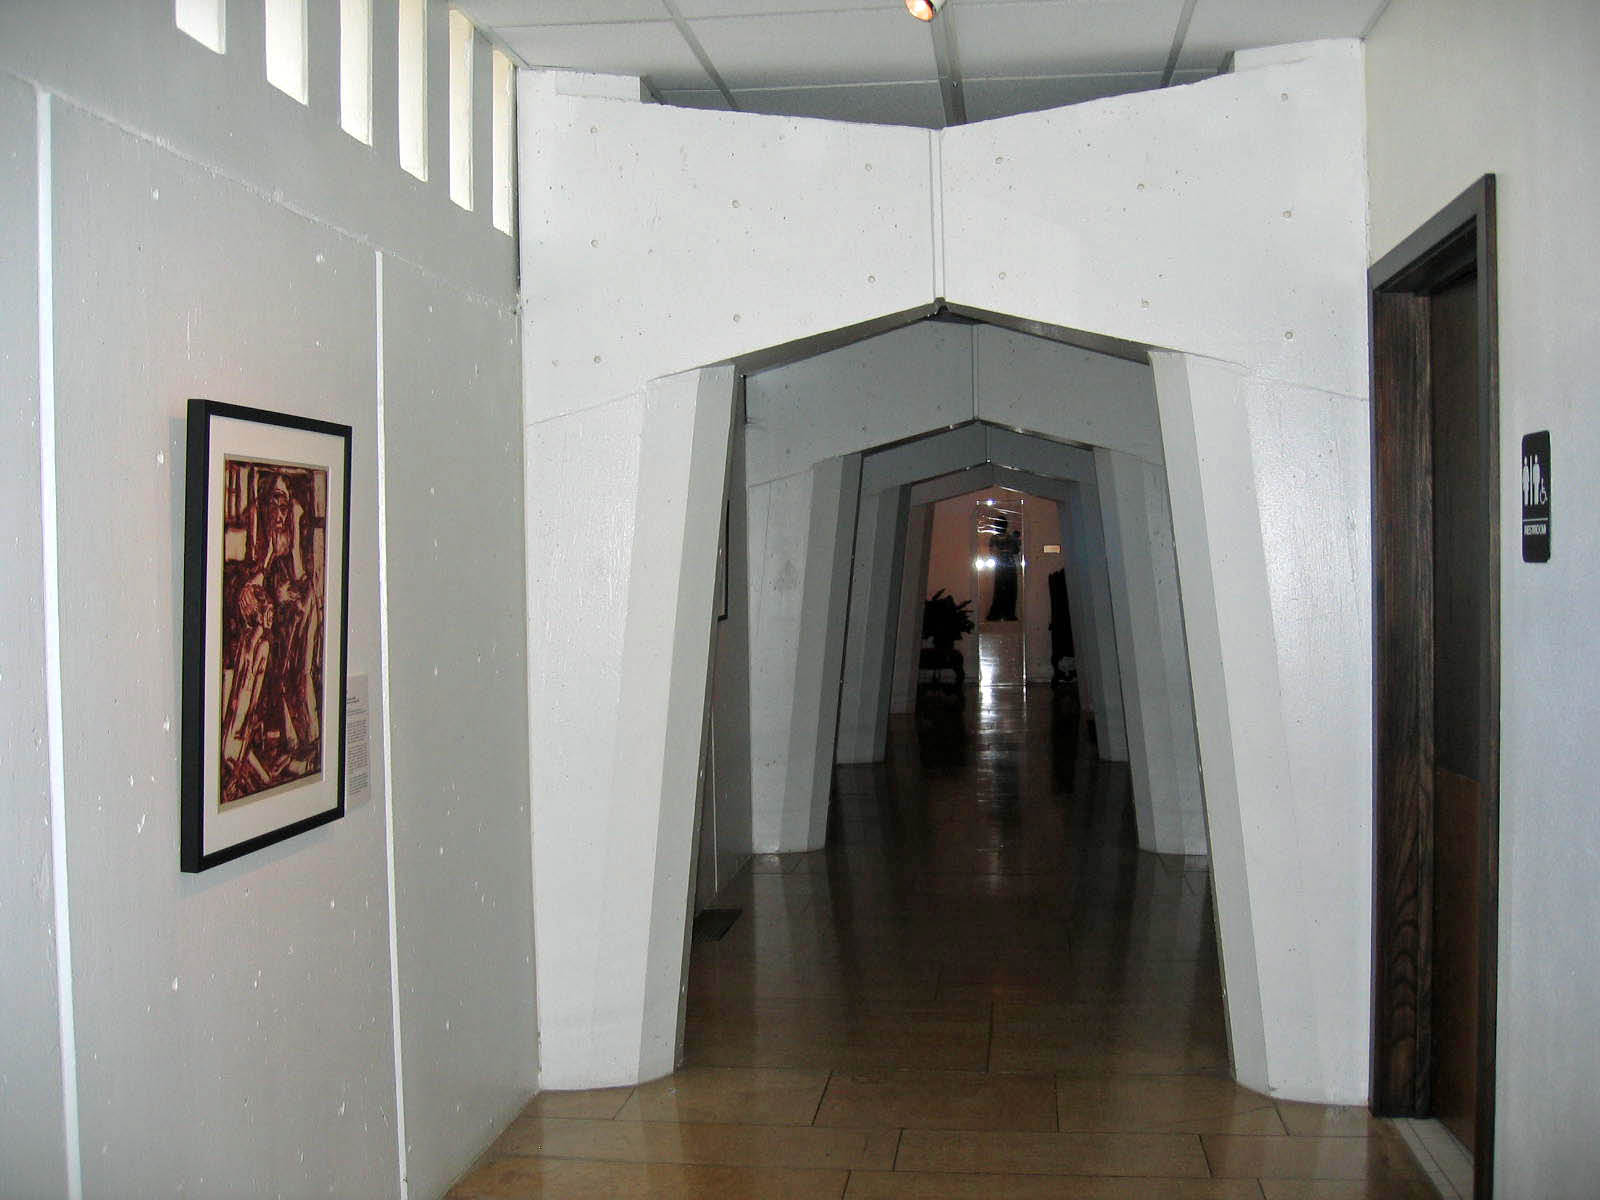 [The+hallway+outside+our+mediation+room.JPG]